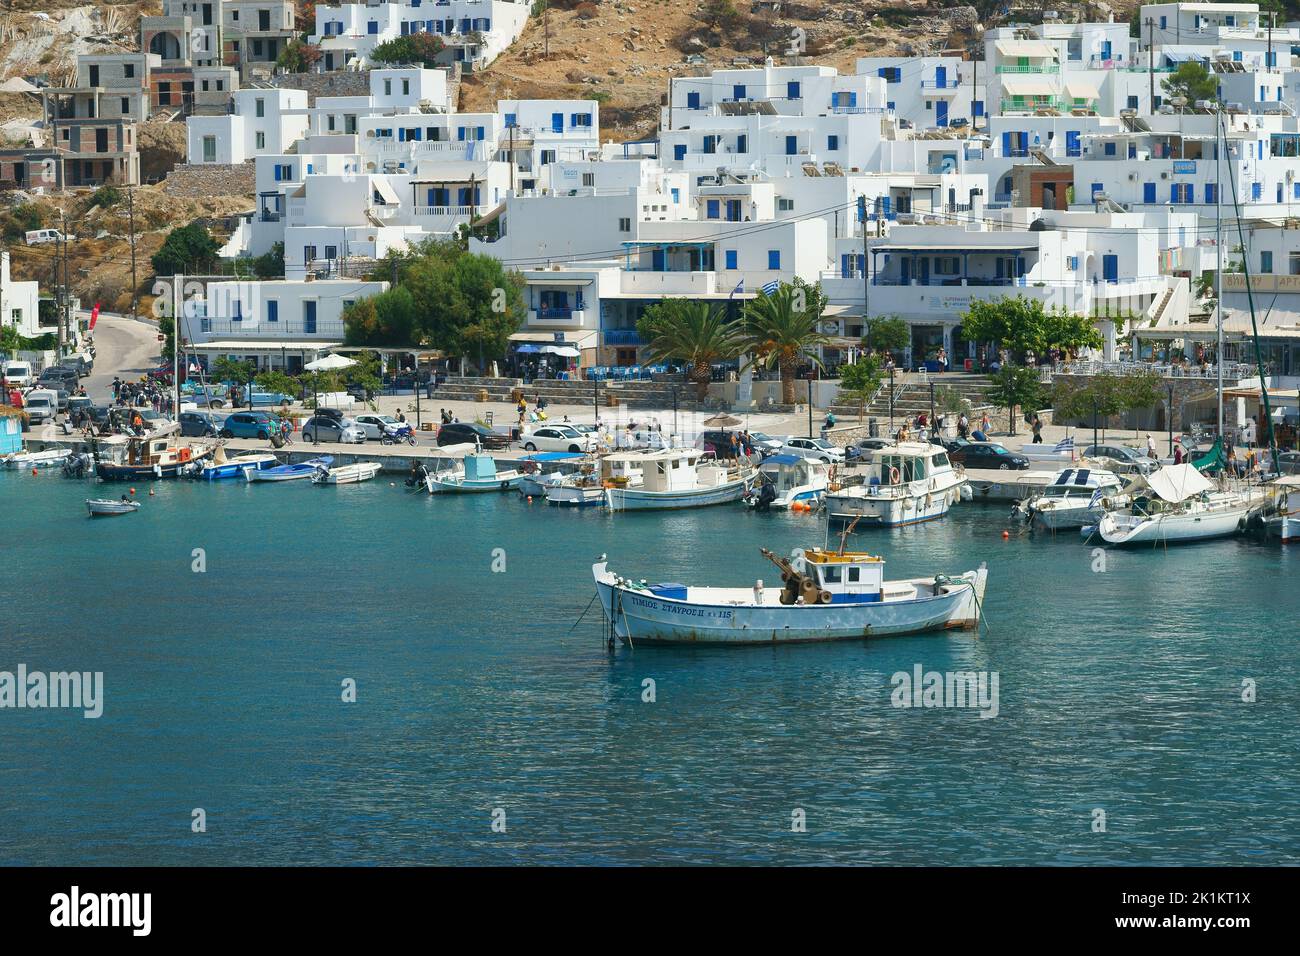 Aigiali town and harbour, Amorgos, Cyclades, Aegean, Greek Islands, Greece, Europe Stock Photo